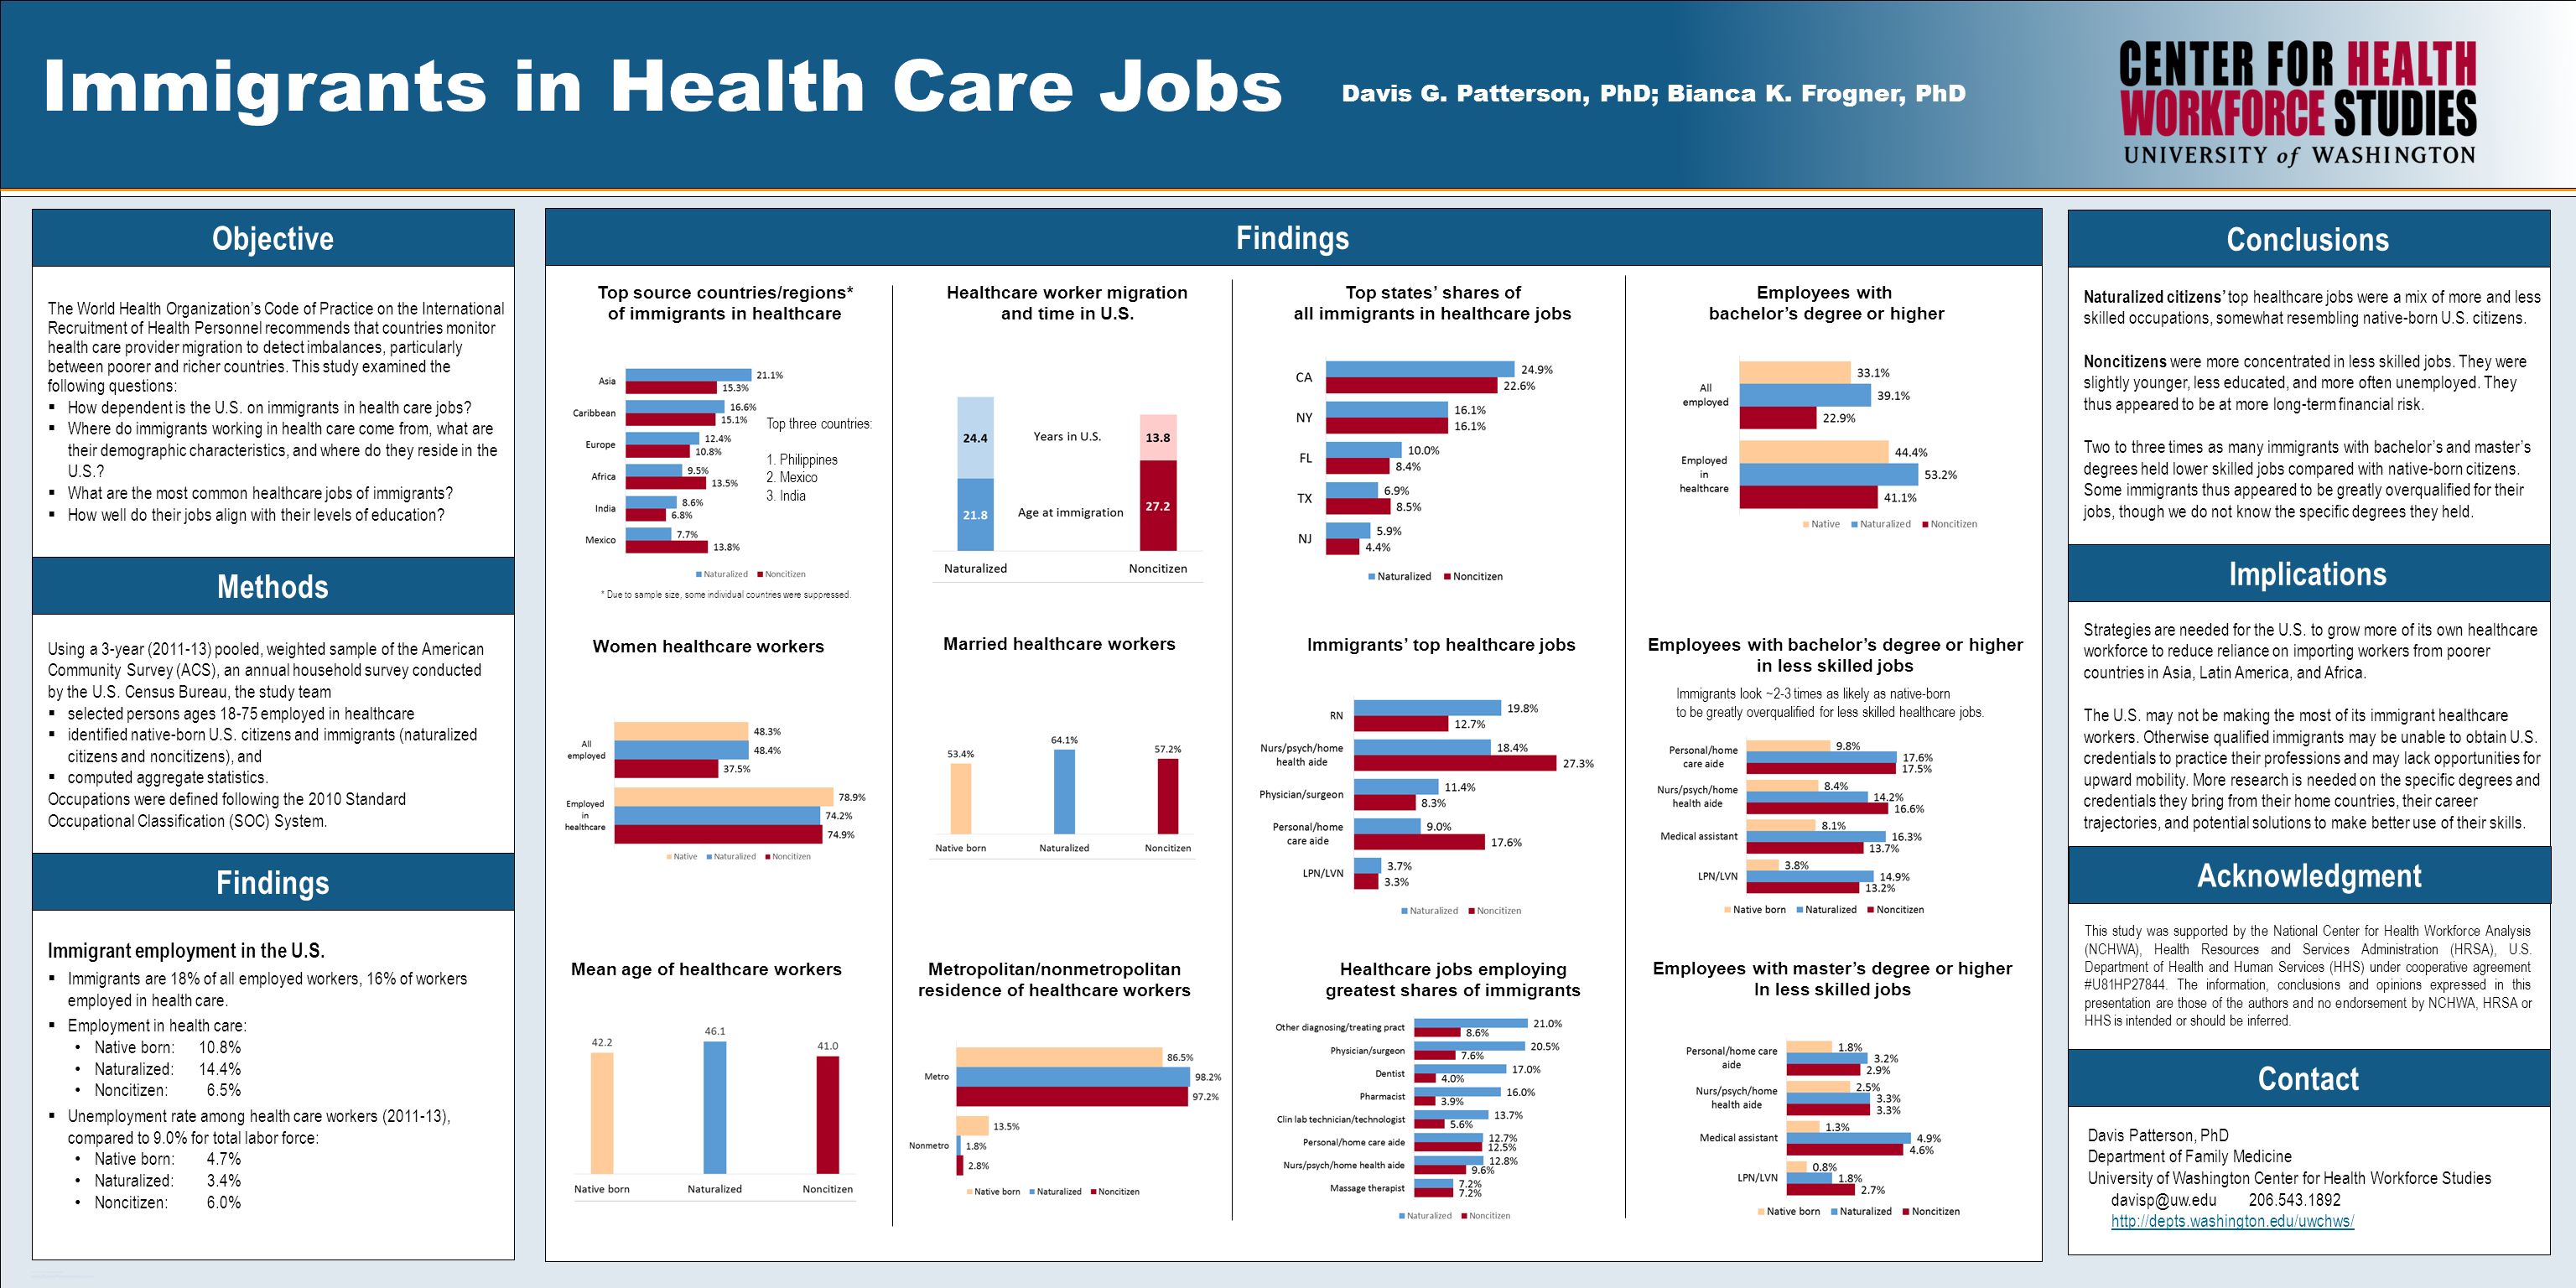 TEMPLATE DESIGN © Naturalized citizens’ top healthcare jobs were a mix of more and less skilled occupations, somewhat resembling native-born U.S.